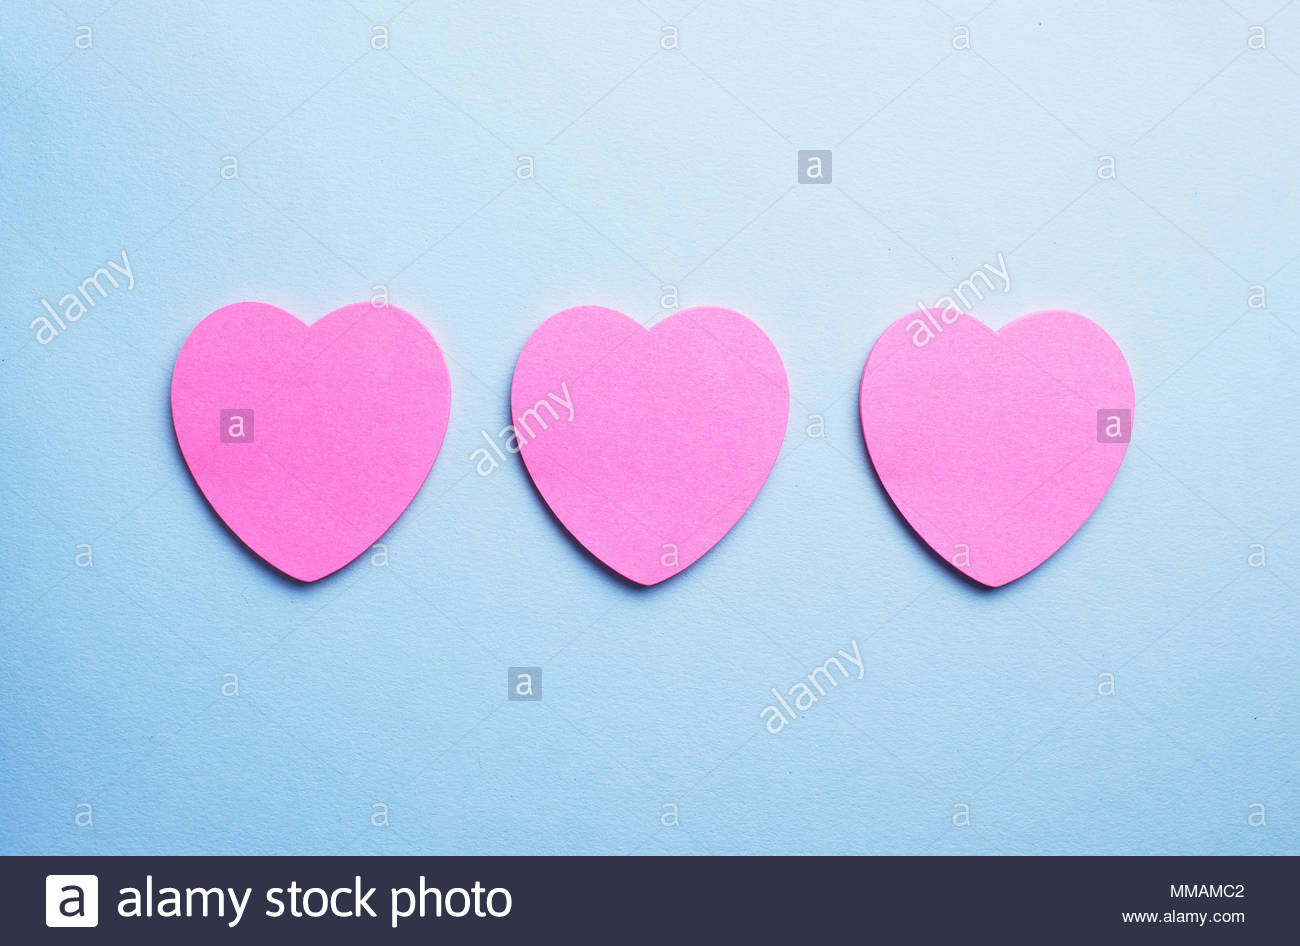 Pink Heart Shaped Sticky Notes Organized In A Row Over Blue